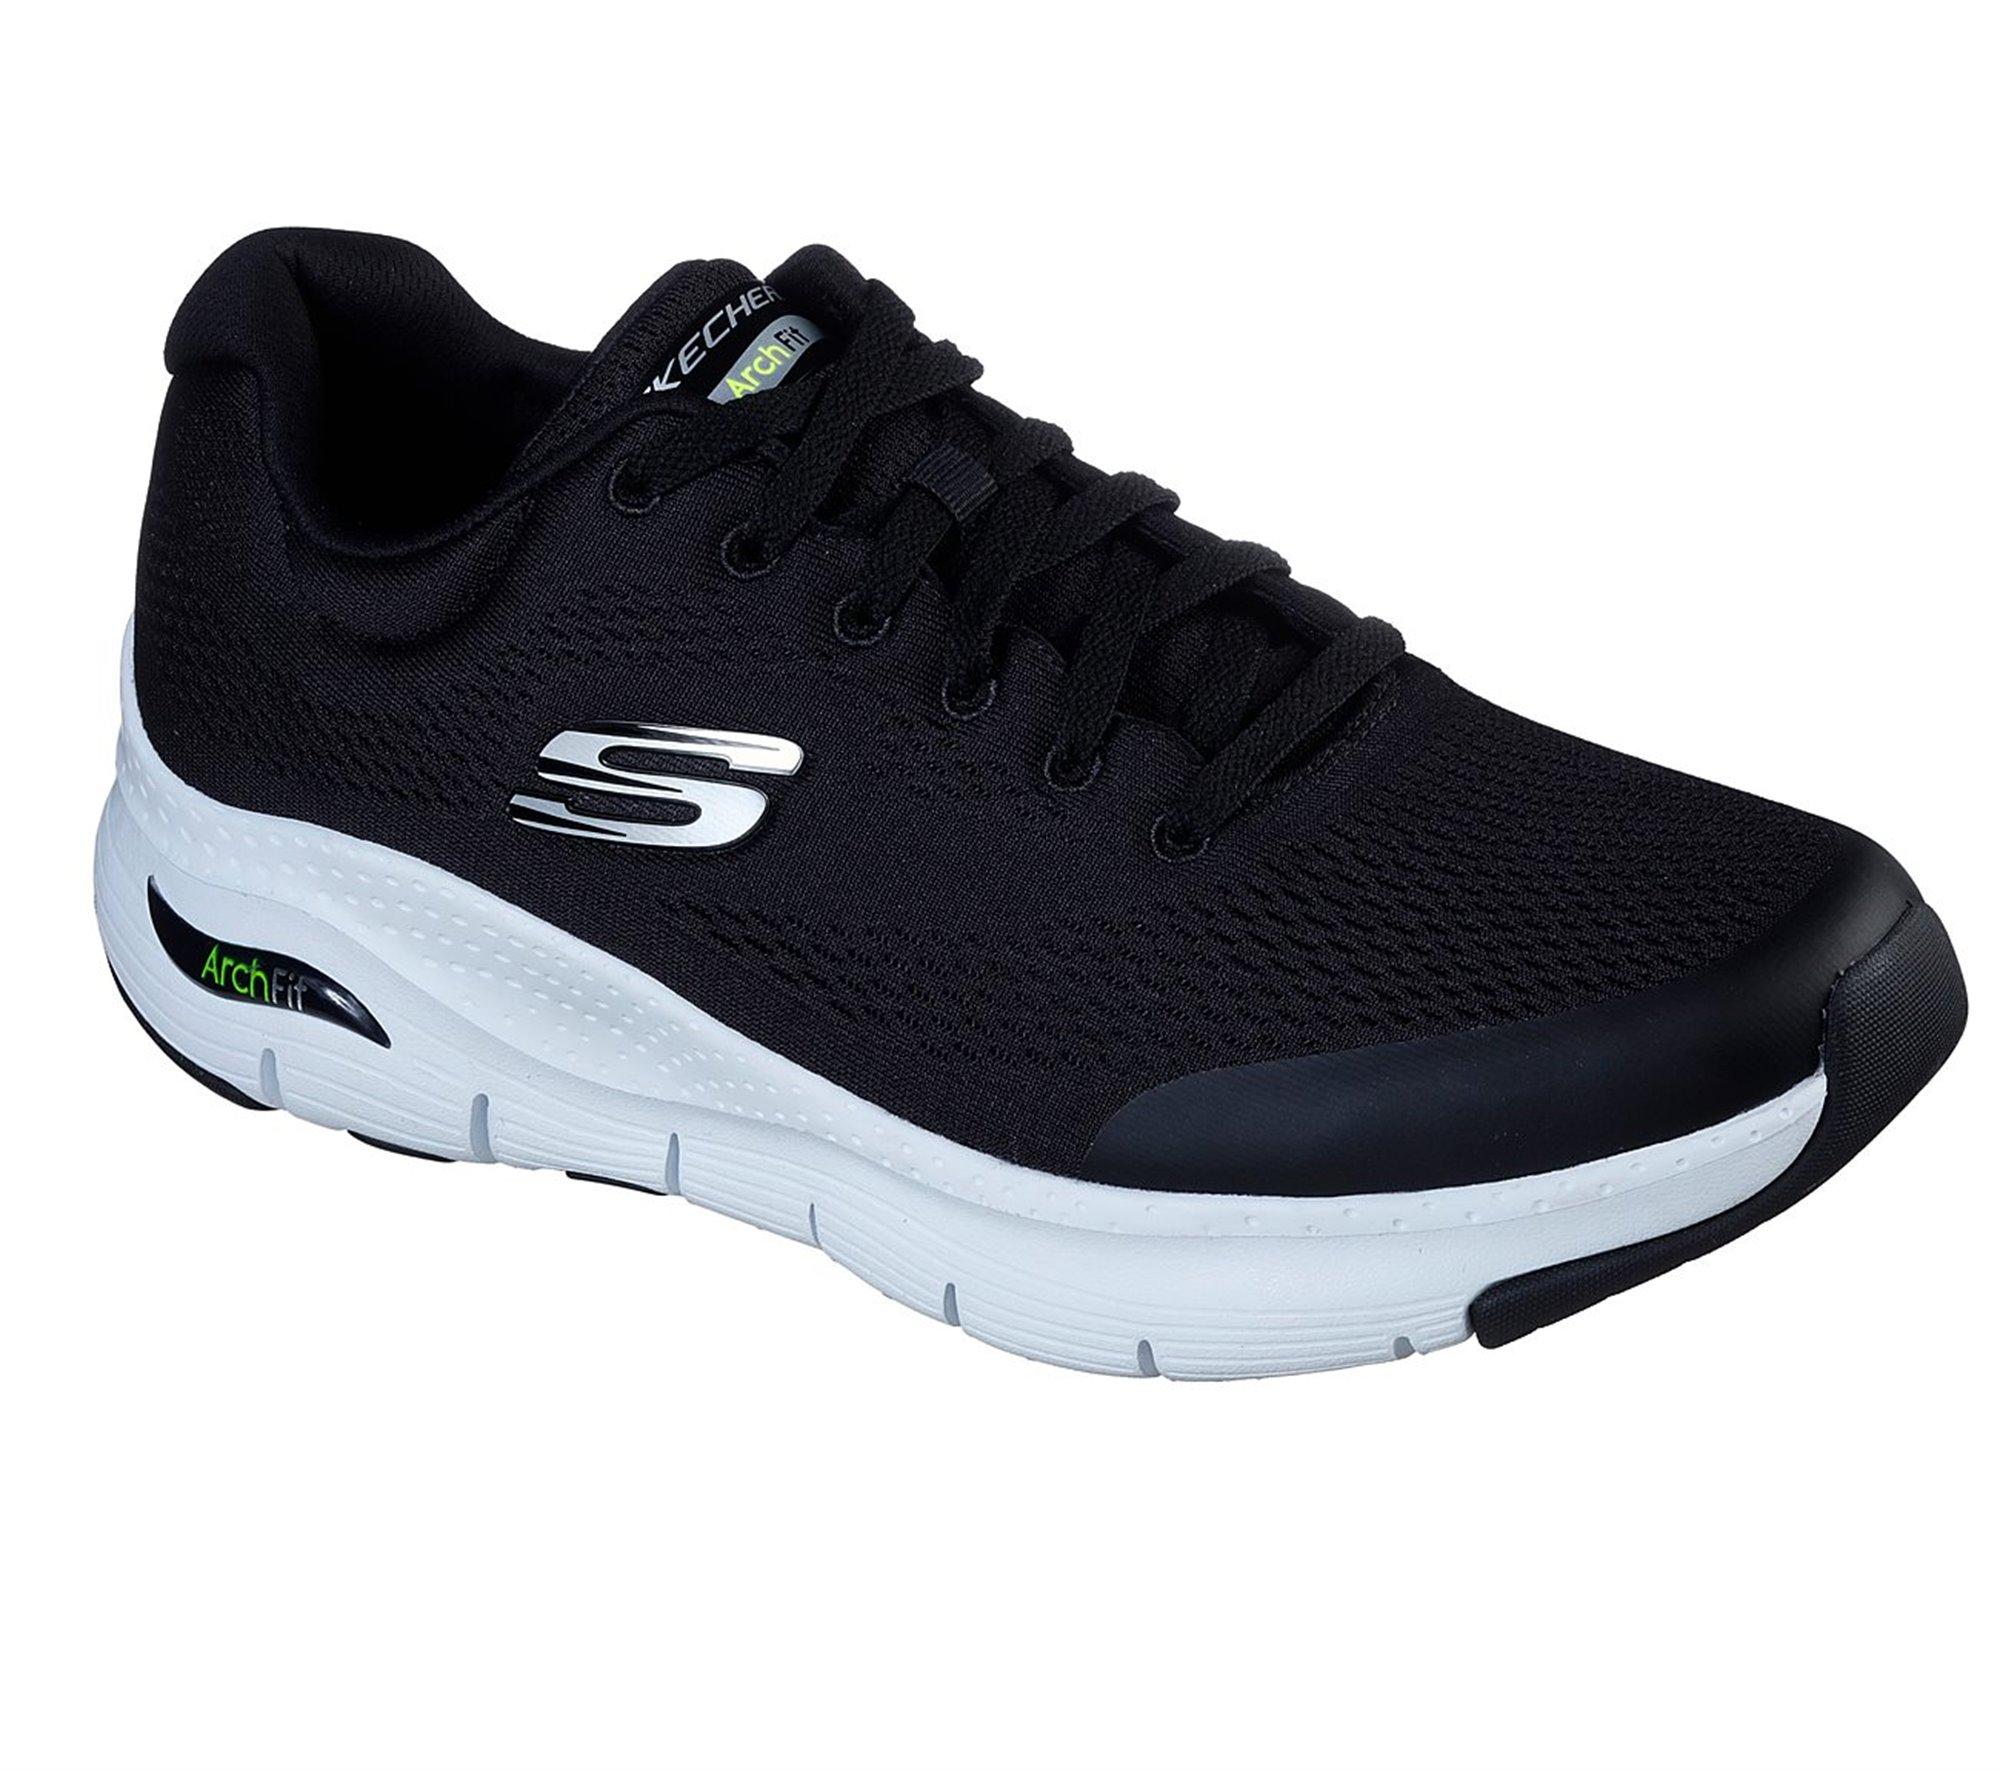 Skechers Synthetic Arch Fit Extra Wide Fit - Final Sale in White Black ...